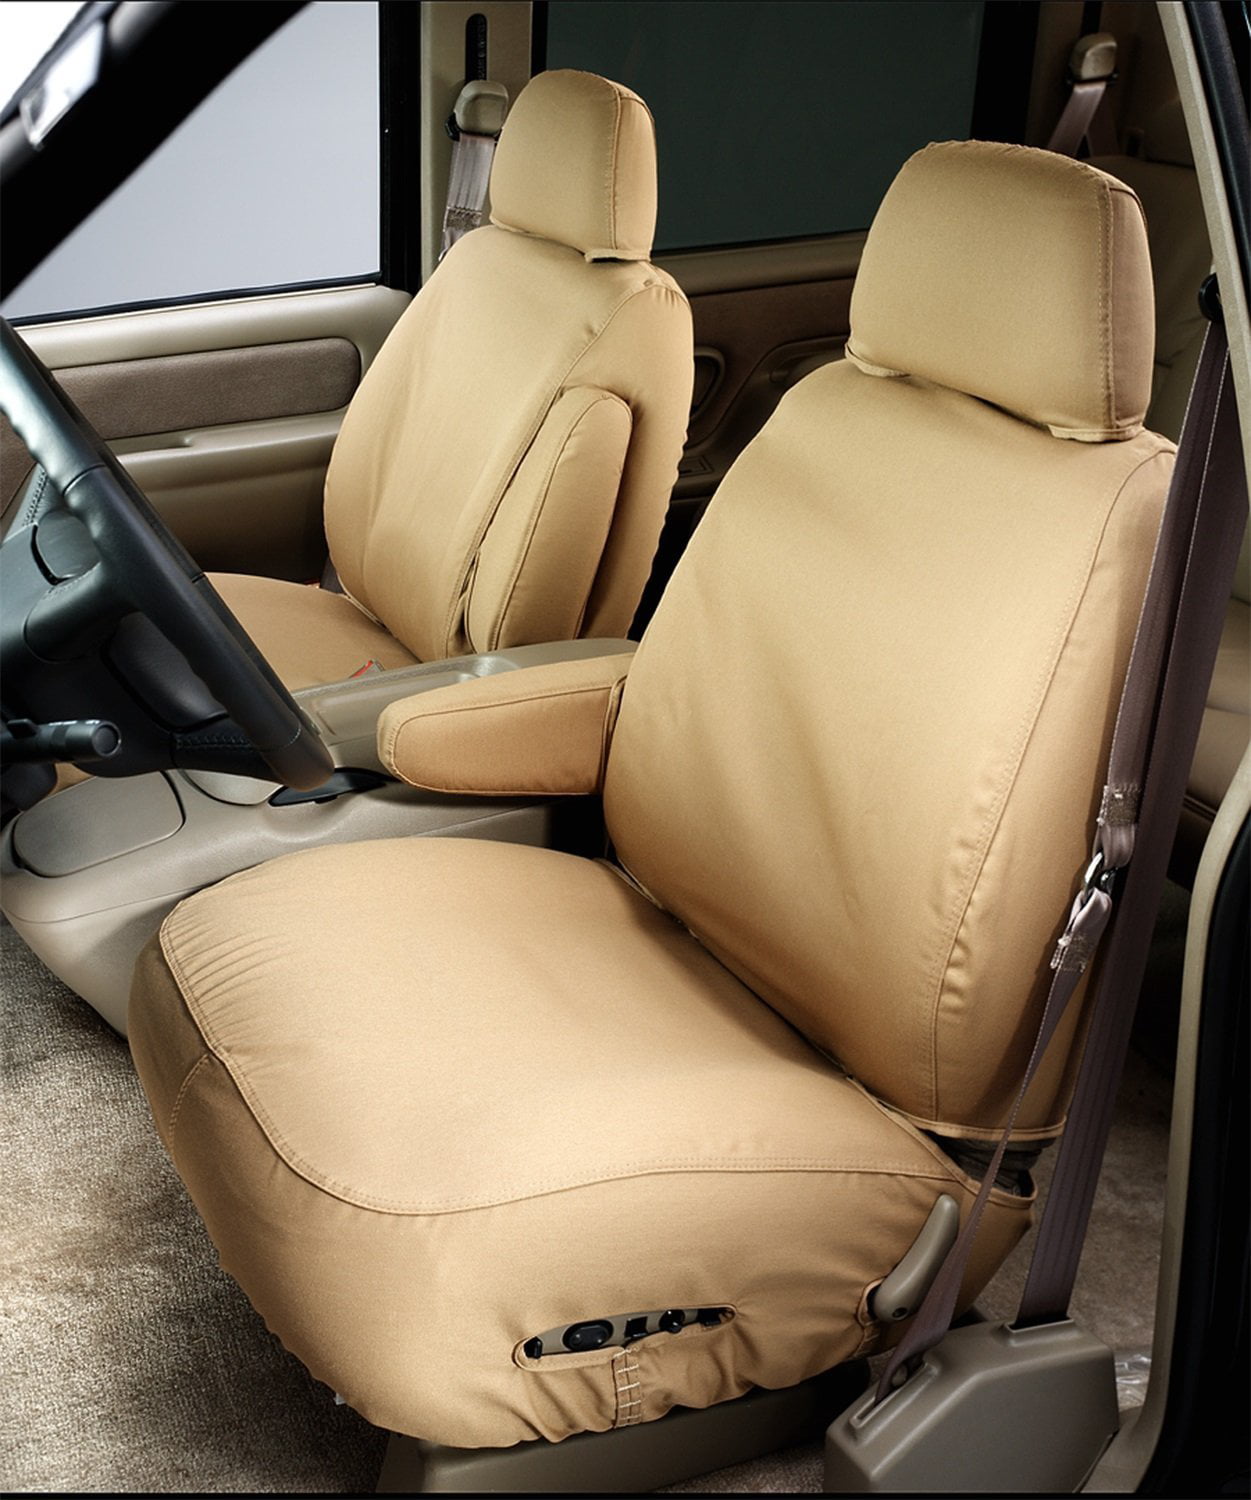 Covercraft SeatSaver Second Row Custom Fit Seat Cover for Select Ford F-150 Models Tan SS8426PCTN Polycotton